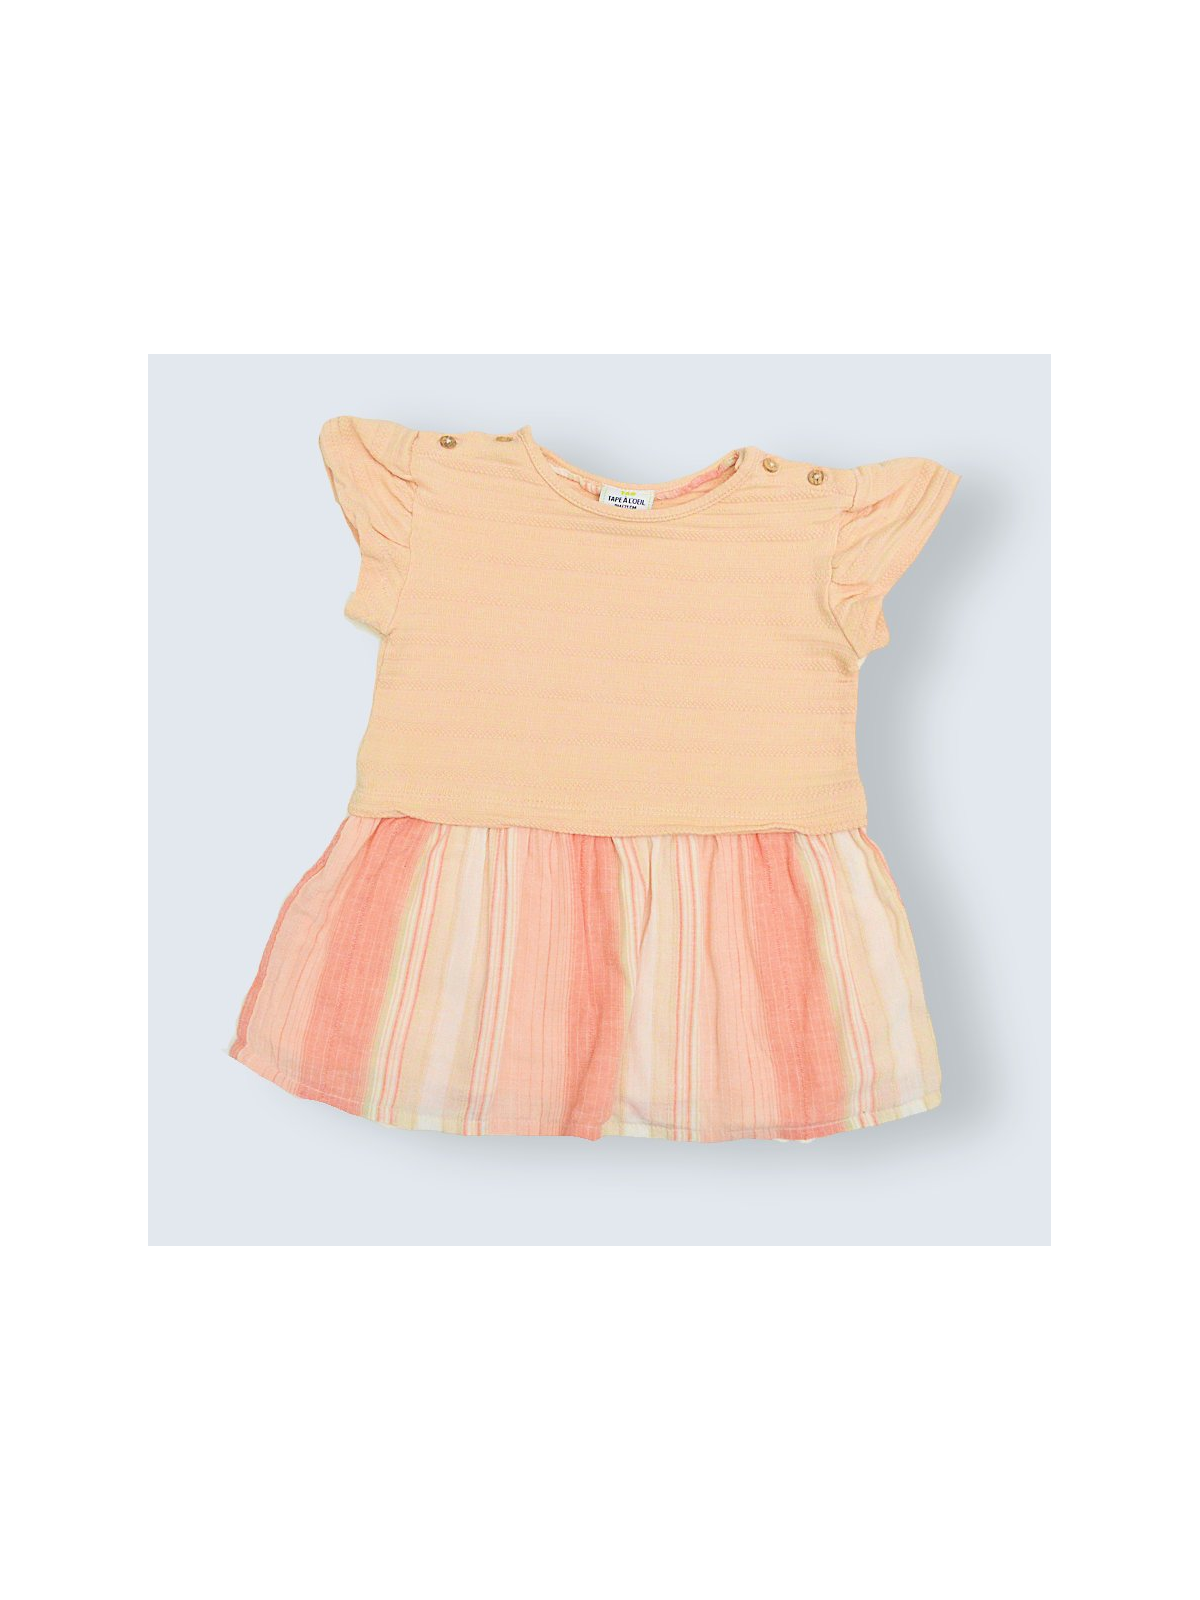 Robe d'occasion TAO 9 Mois pour fille.